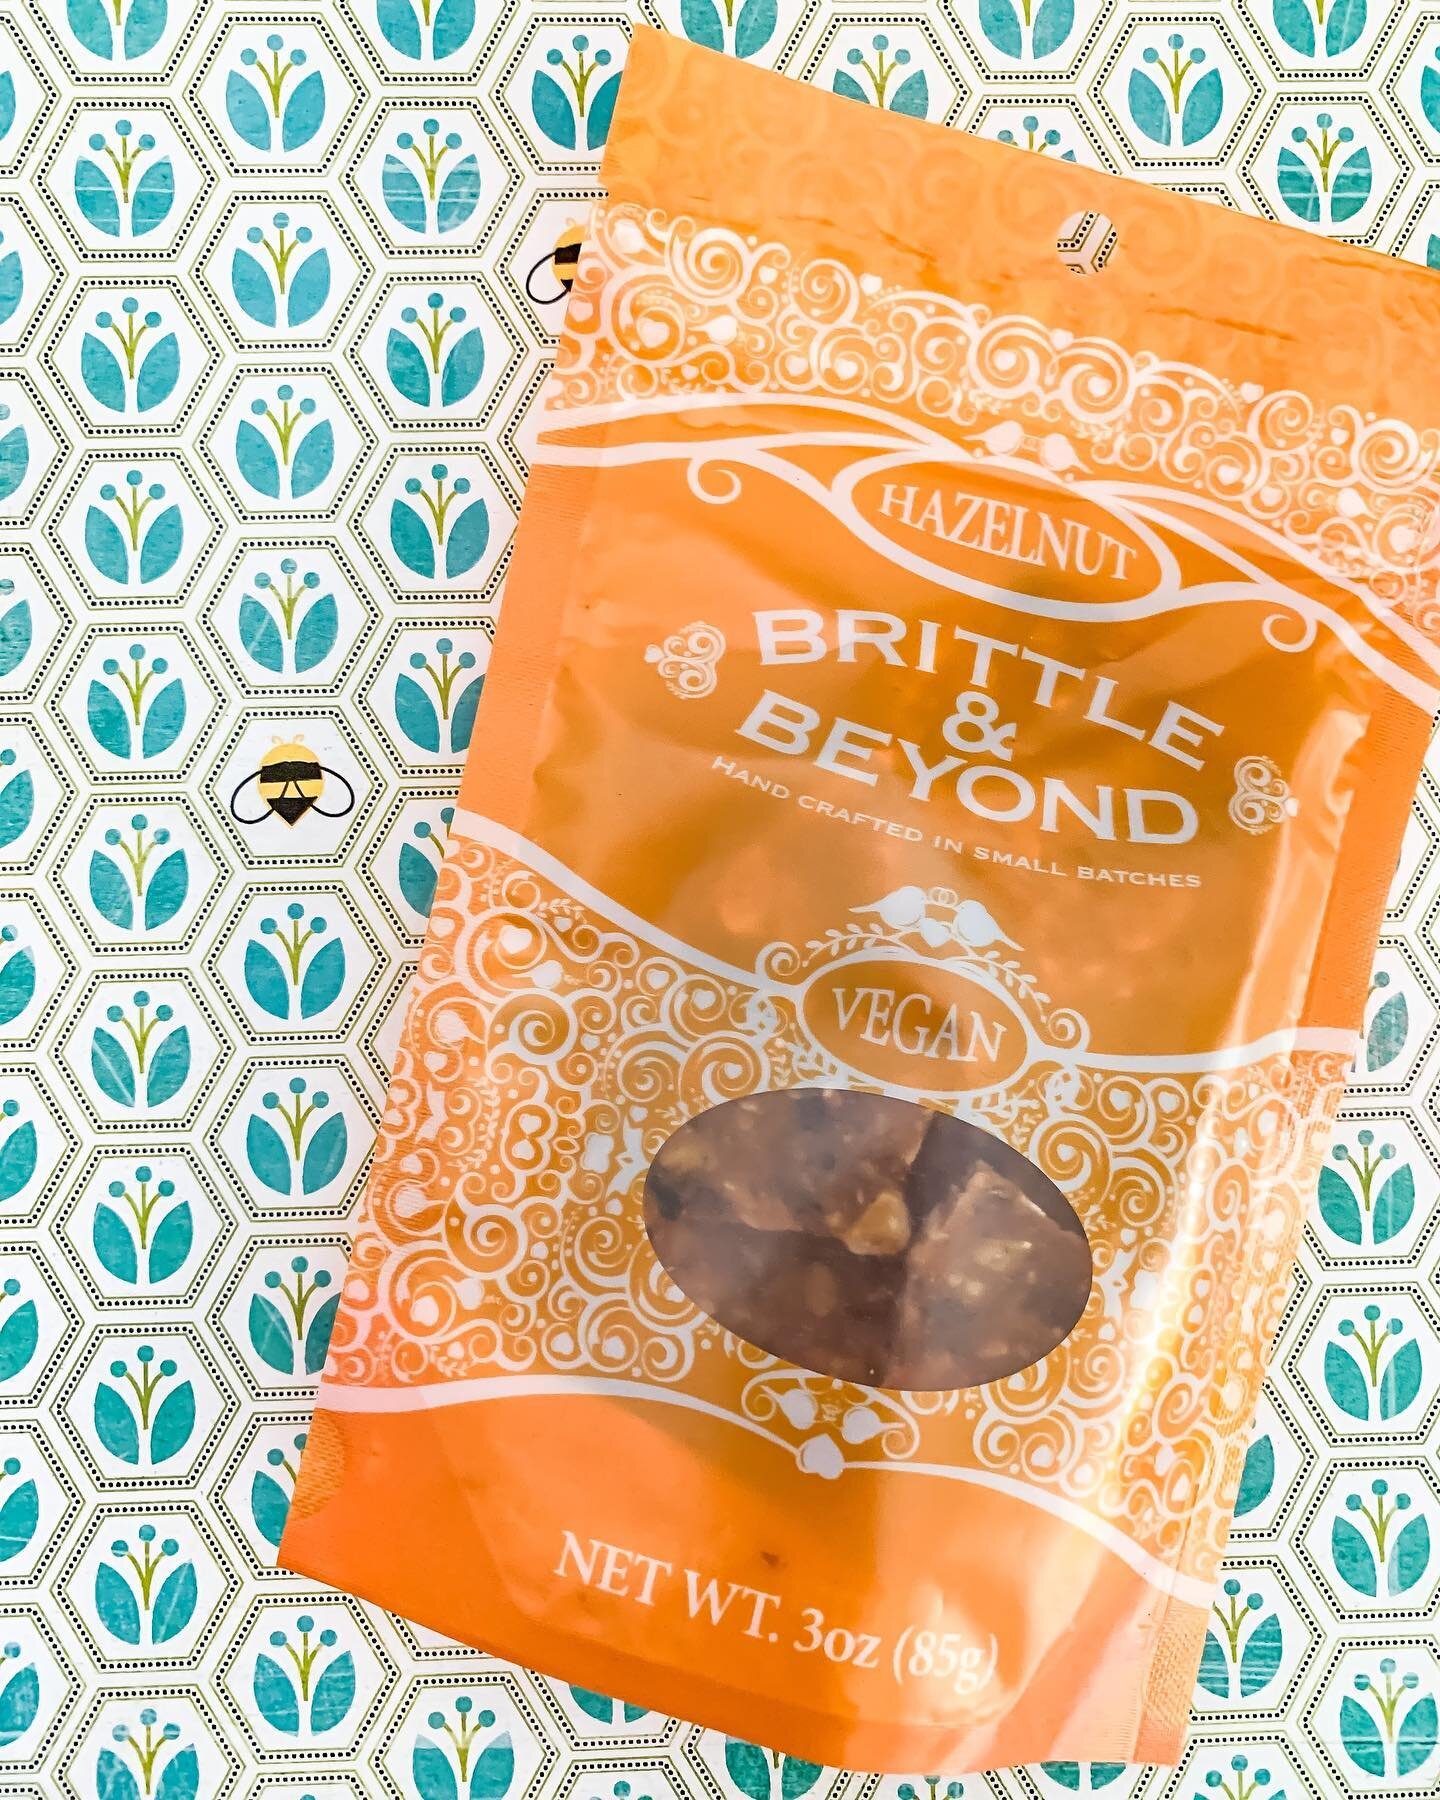 Feeling nutty? 🌰

Our hazelnut brittle is perfect for fans of @Nutella or @Kinderus!
.
.
.
#brittle #candybrittle #nutella #kinder #kindercandy #hazelnut #hazelnutcandy #spring #spring2021 #veganeats #peanutfree #glutenfree